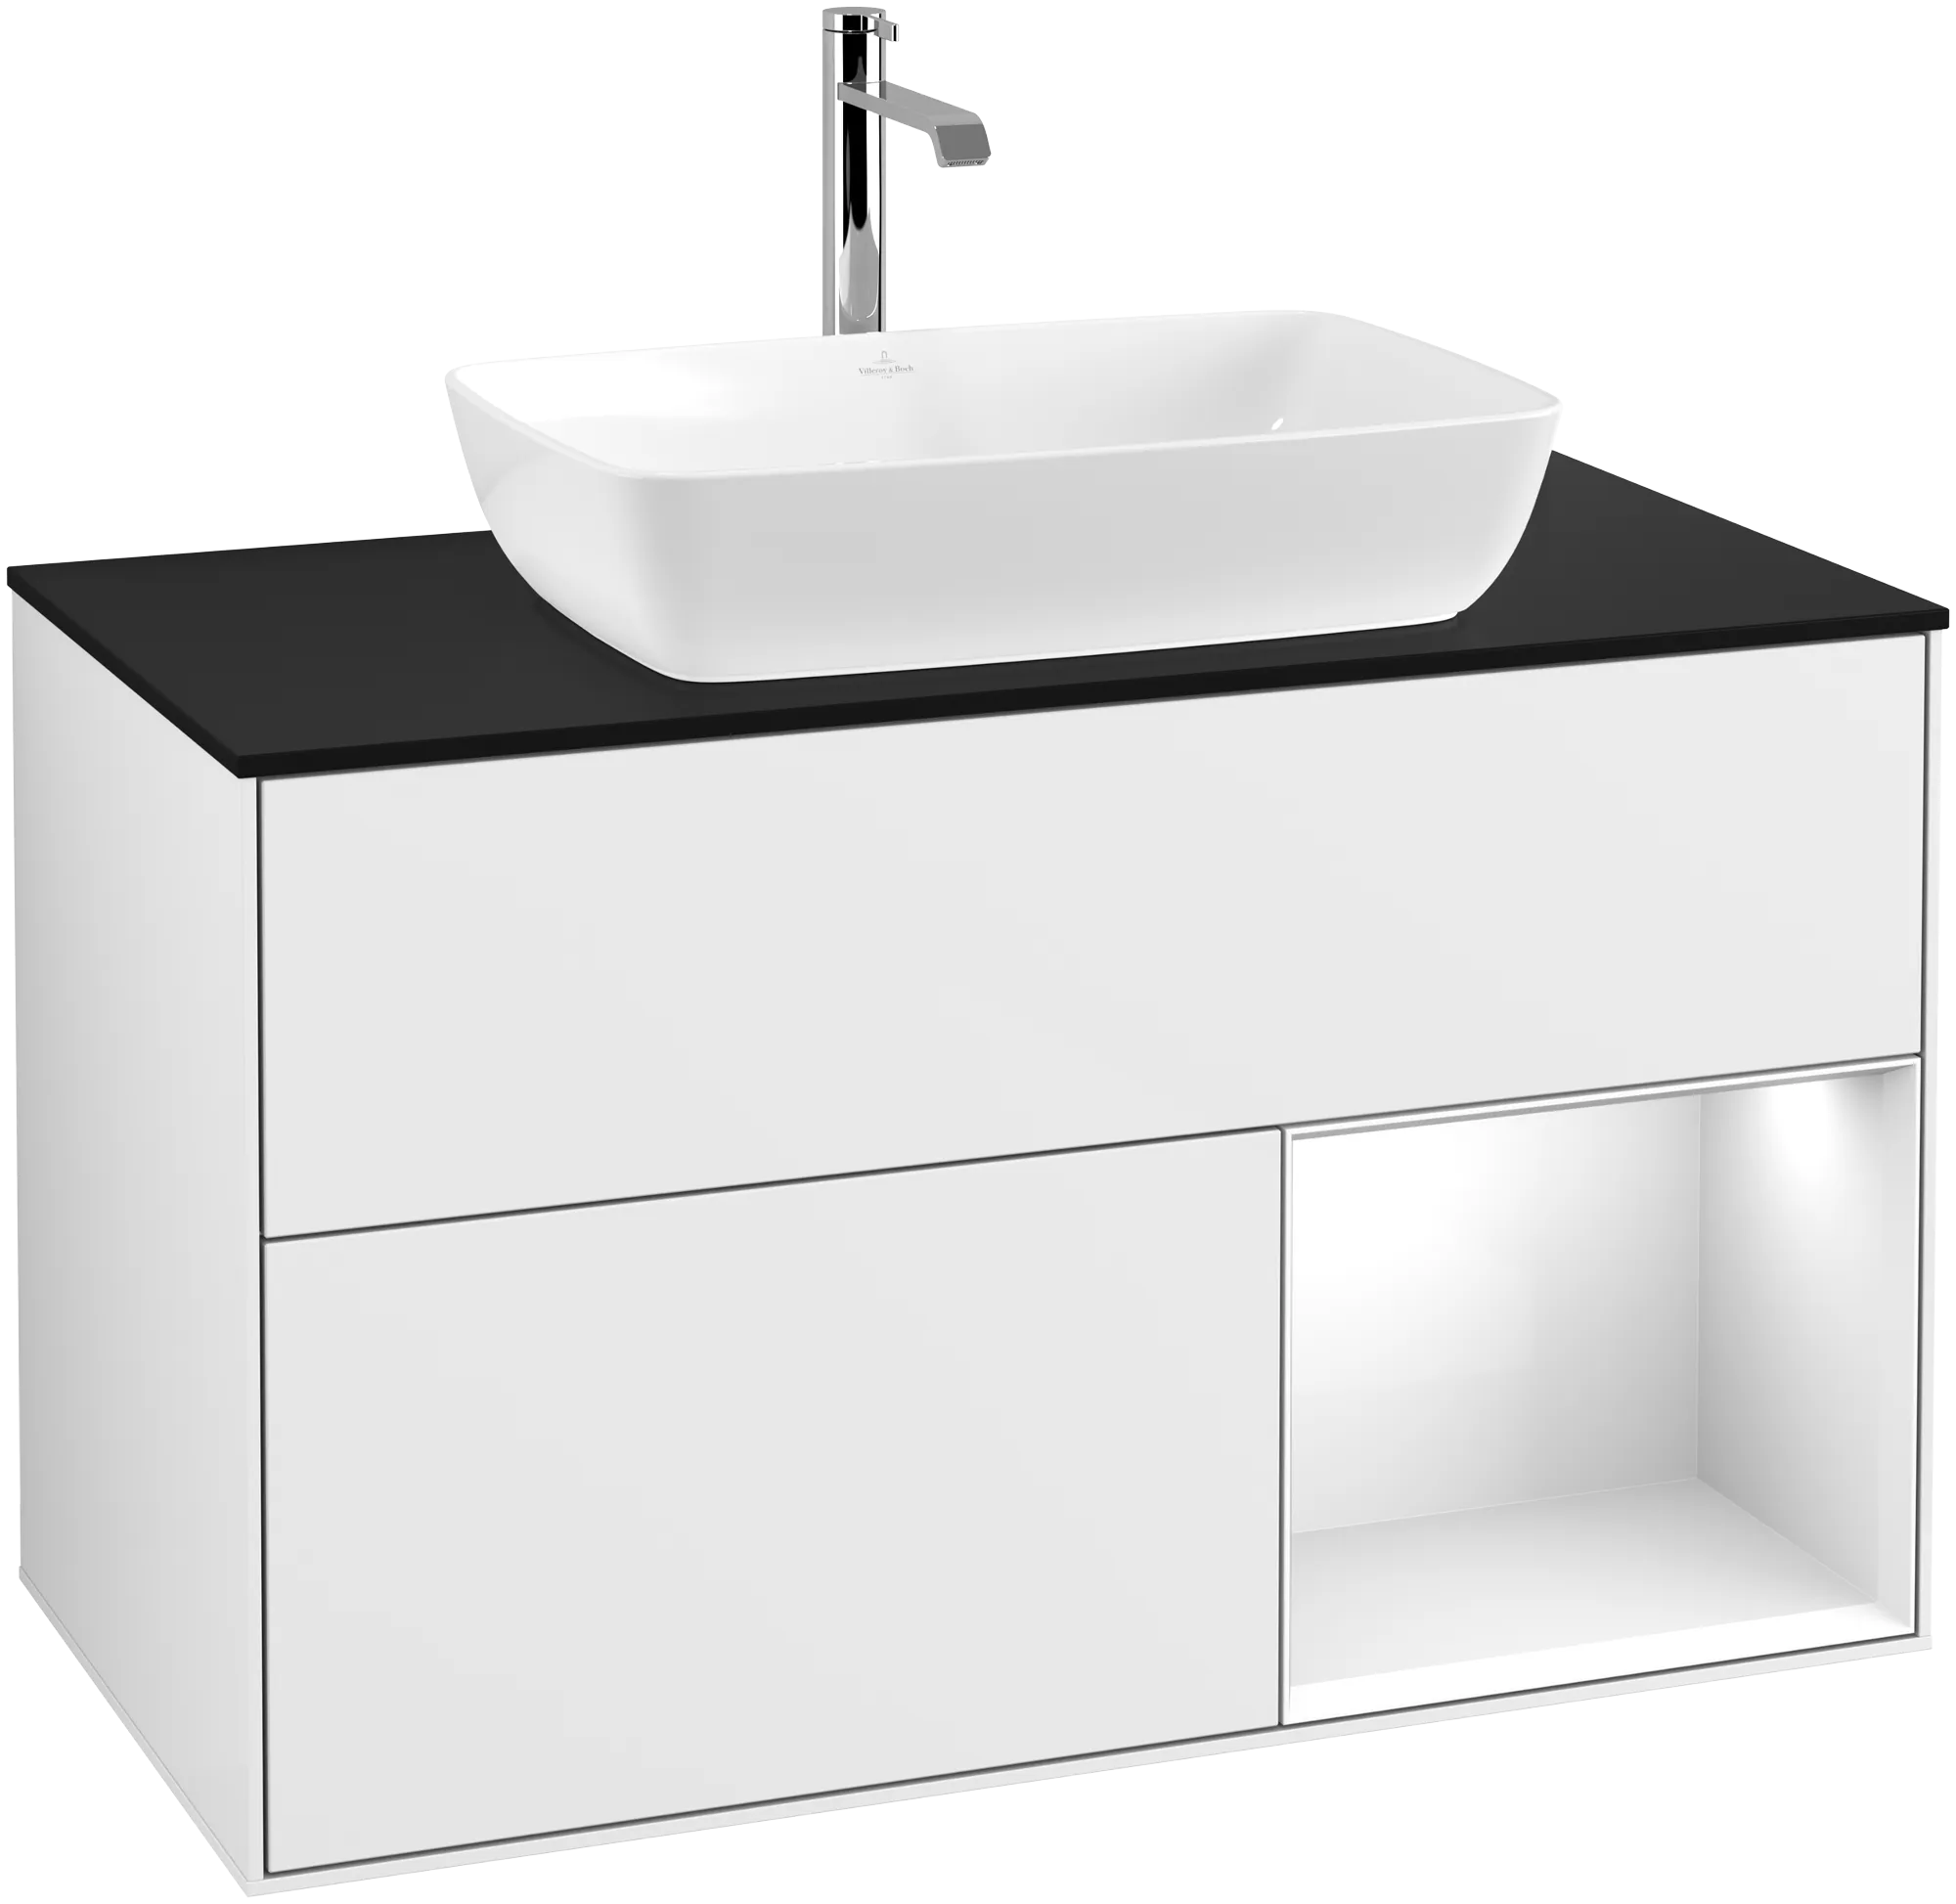 Picture of VILLEROY BOCH Finion Vanity unit, with lighting, 2 pull-out compartments, 1000 x 603 x 501 mm, Glossy White Lacquer / Glossy White Lacquer / Glass Black Matt #G782GFGF